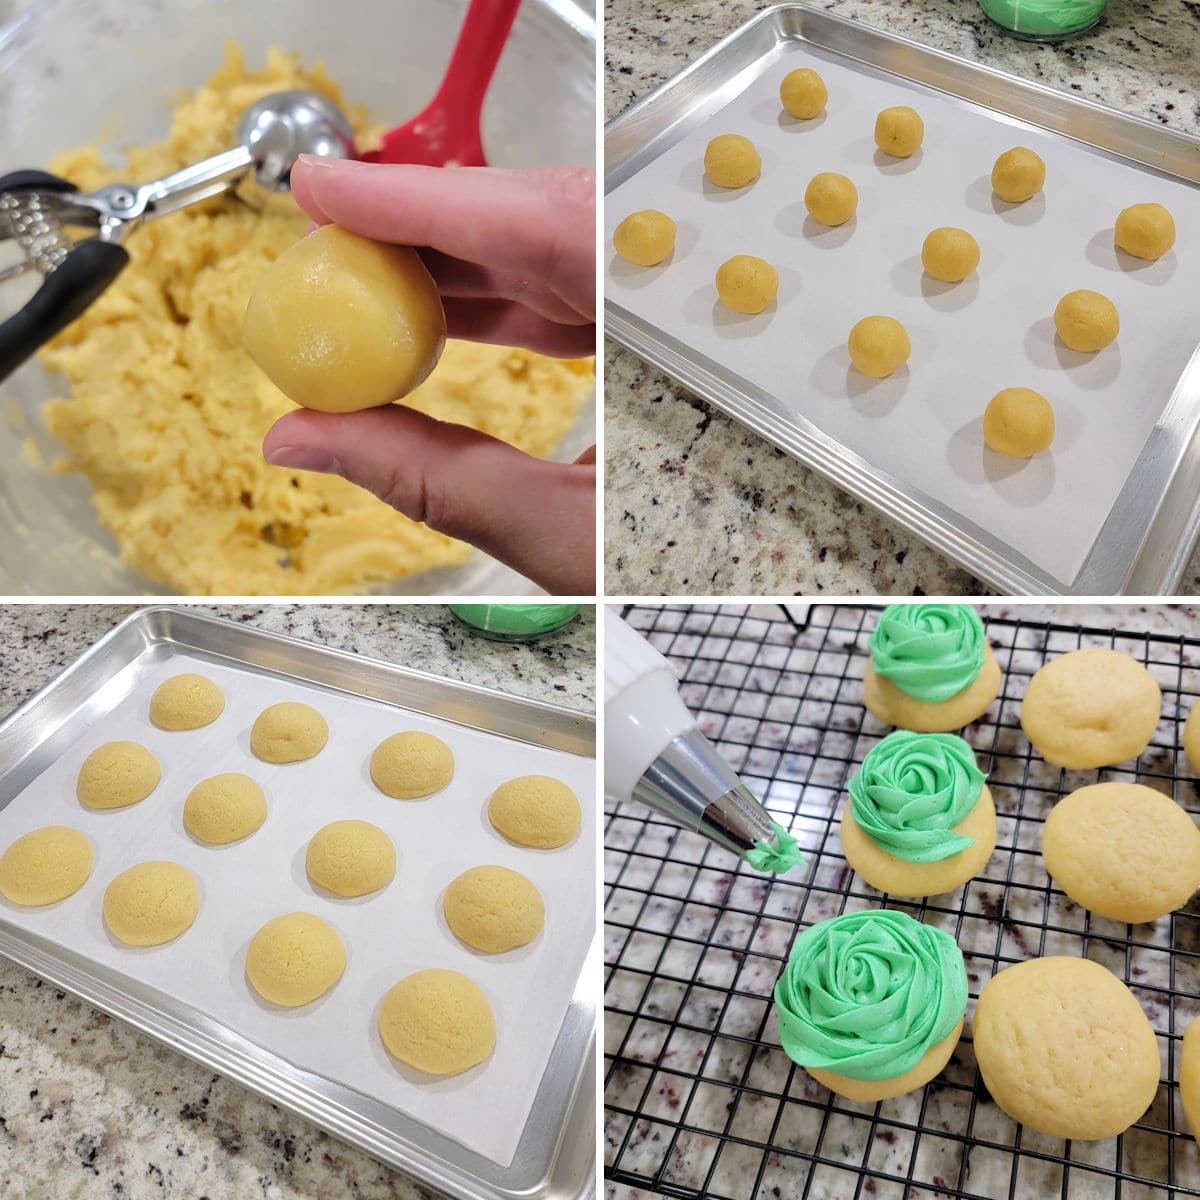 Rolling dough into balls, baking on a cookie sheet, and frosting.